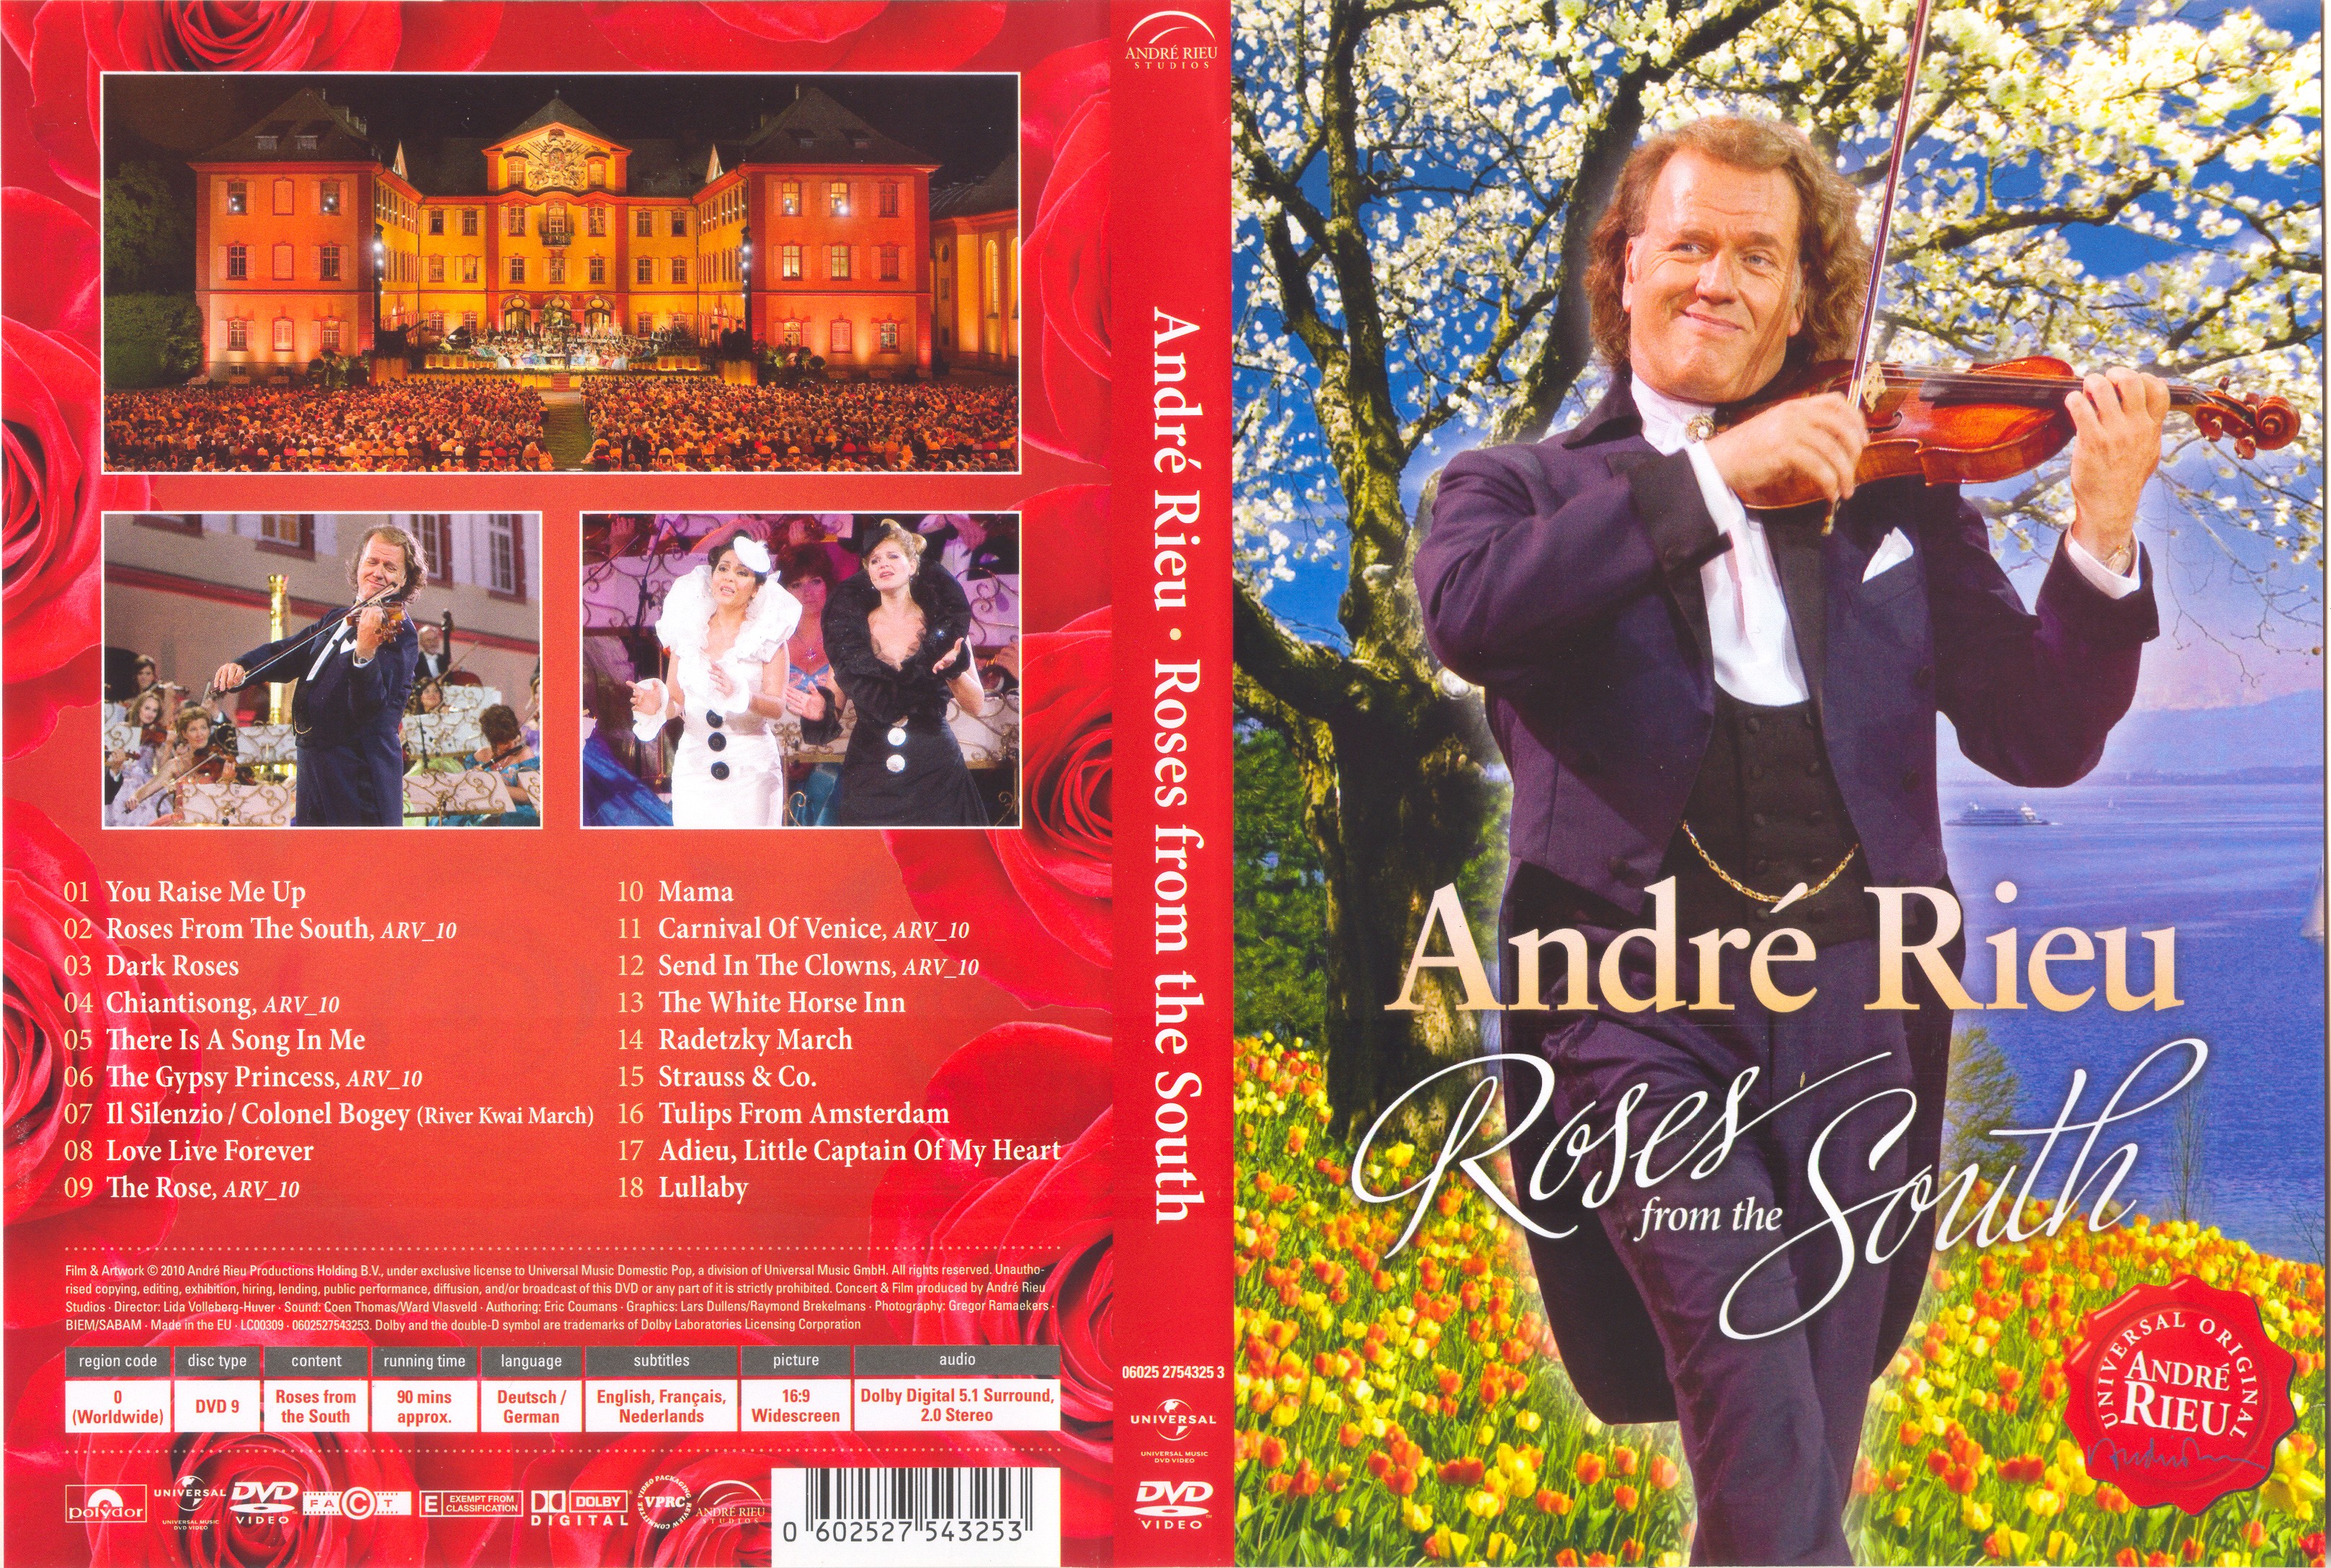 Jaquette DVD Andre Rieu Roses from the South